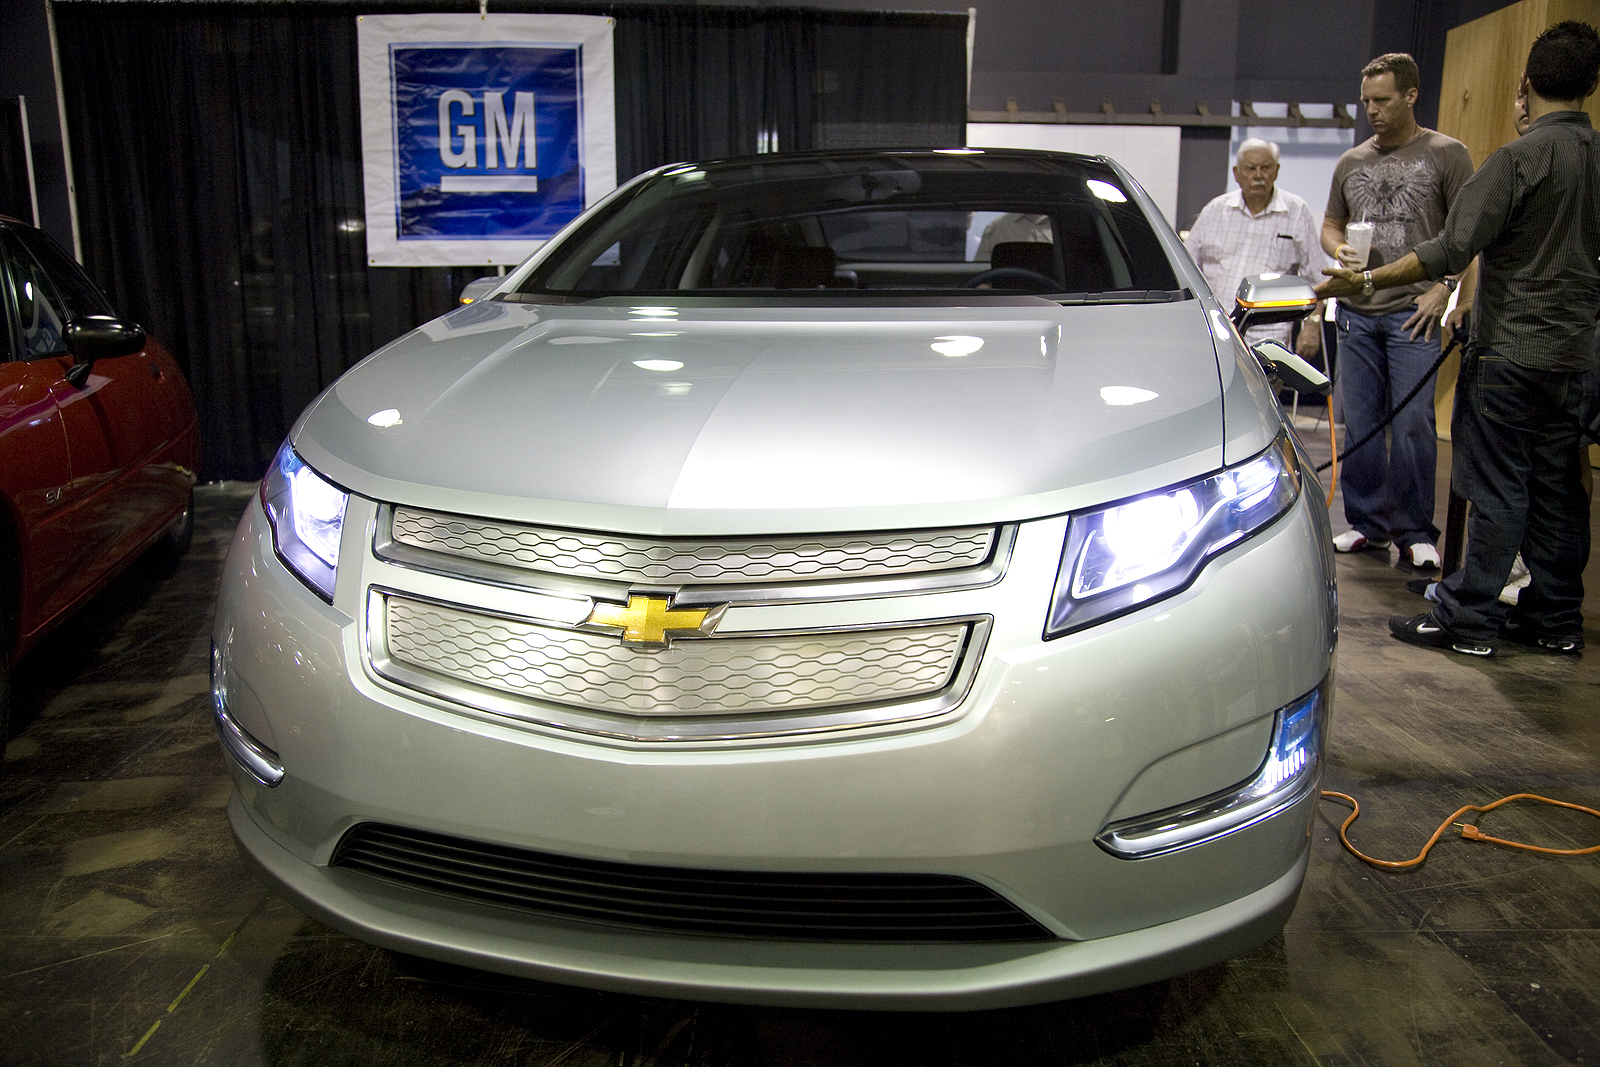 GM Delivers 26 Electric Vehicles in 4th Quarter IER